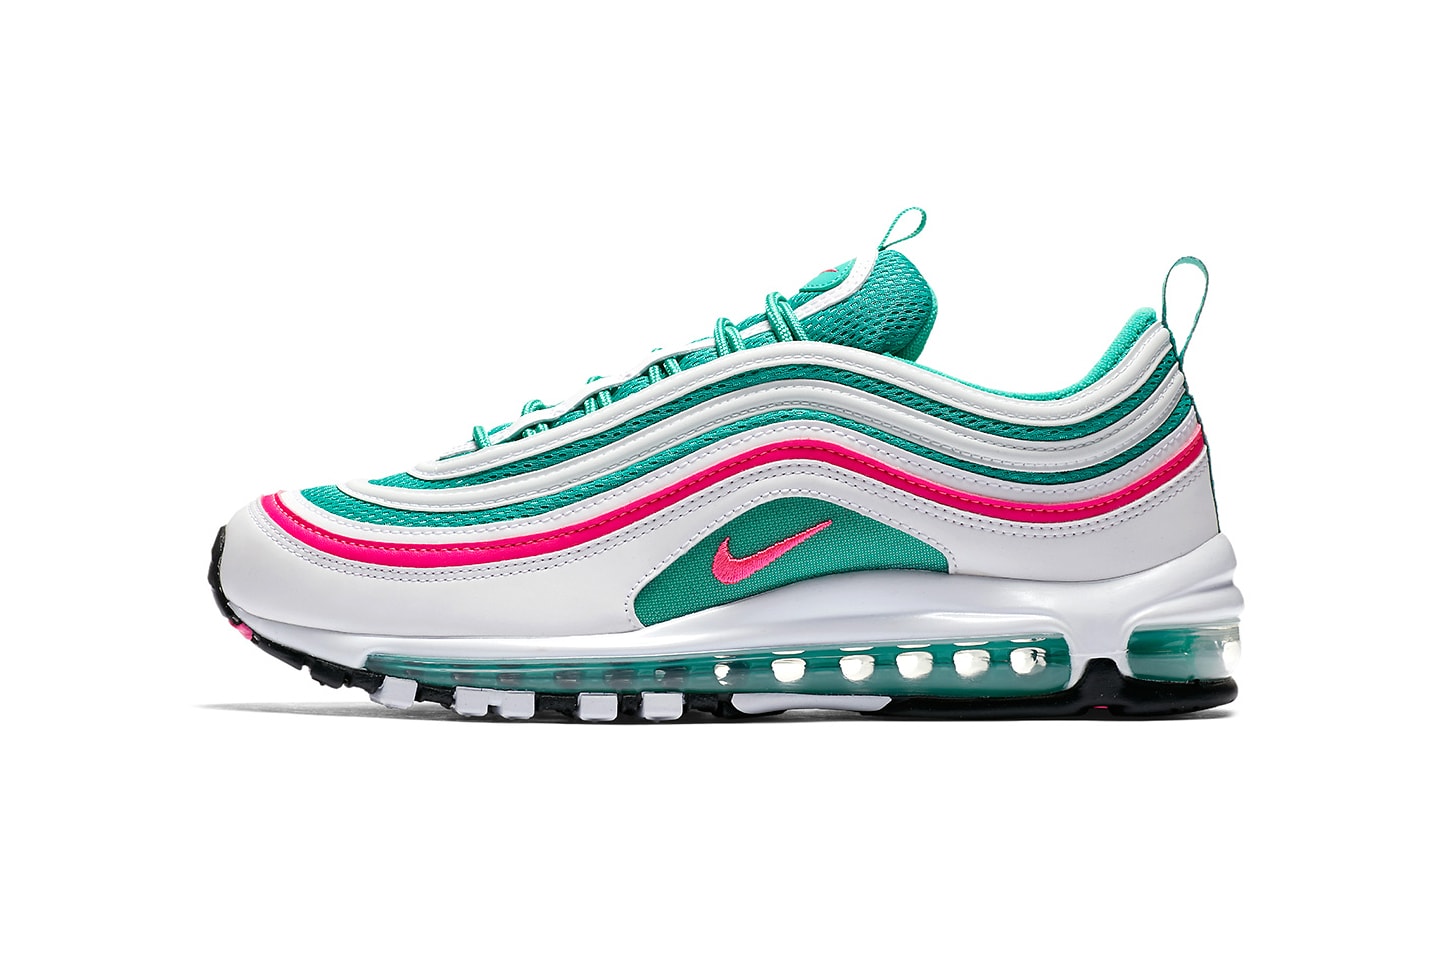 Nike Air Max 97 South Beach White Pink Blast Kinetic Green Black 921826 102 march 31 2018 release date info drop sneakers shoes footwear